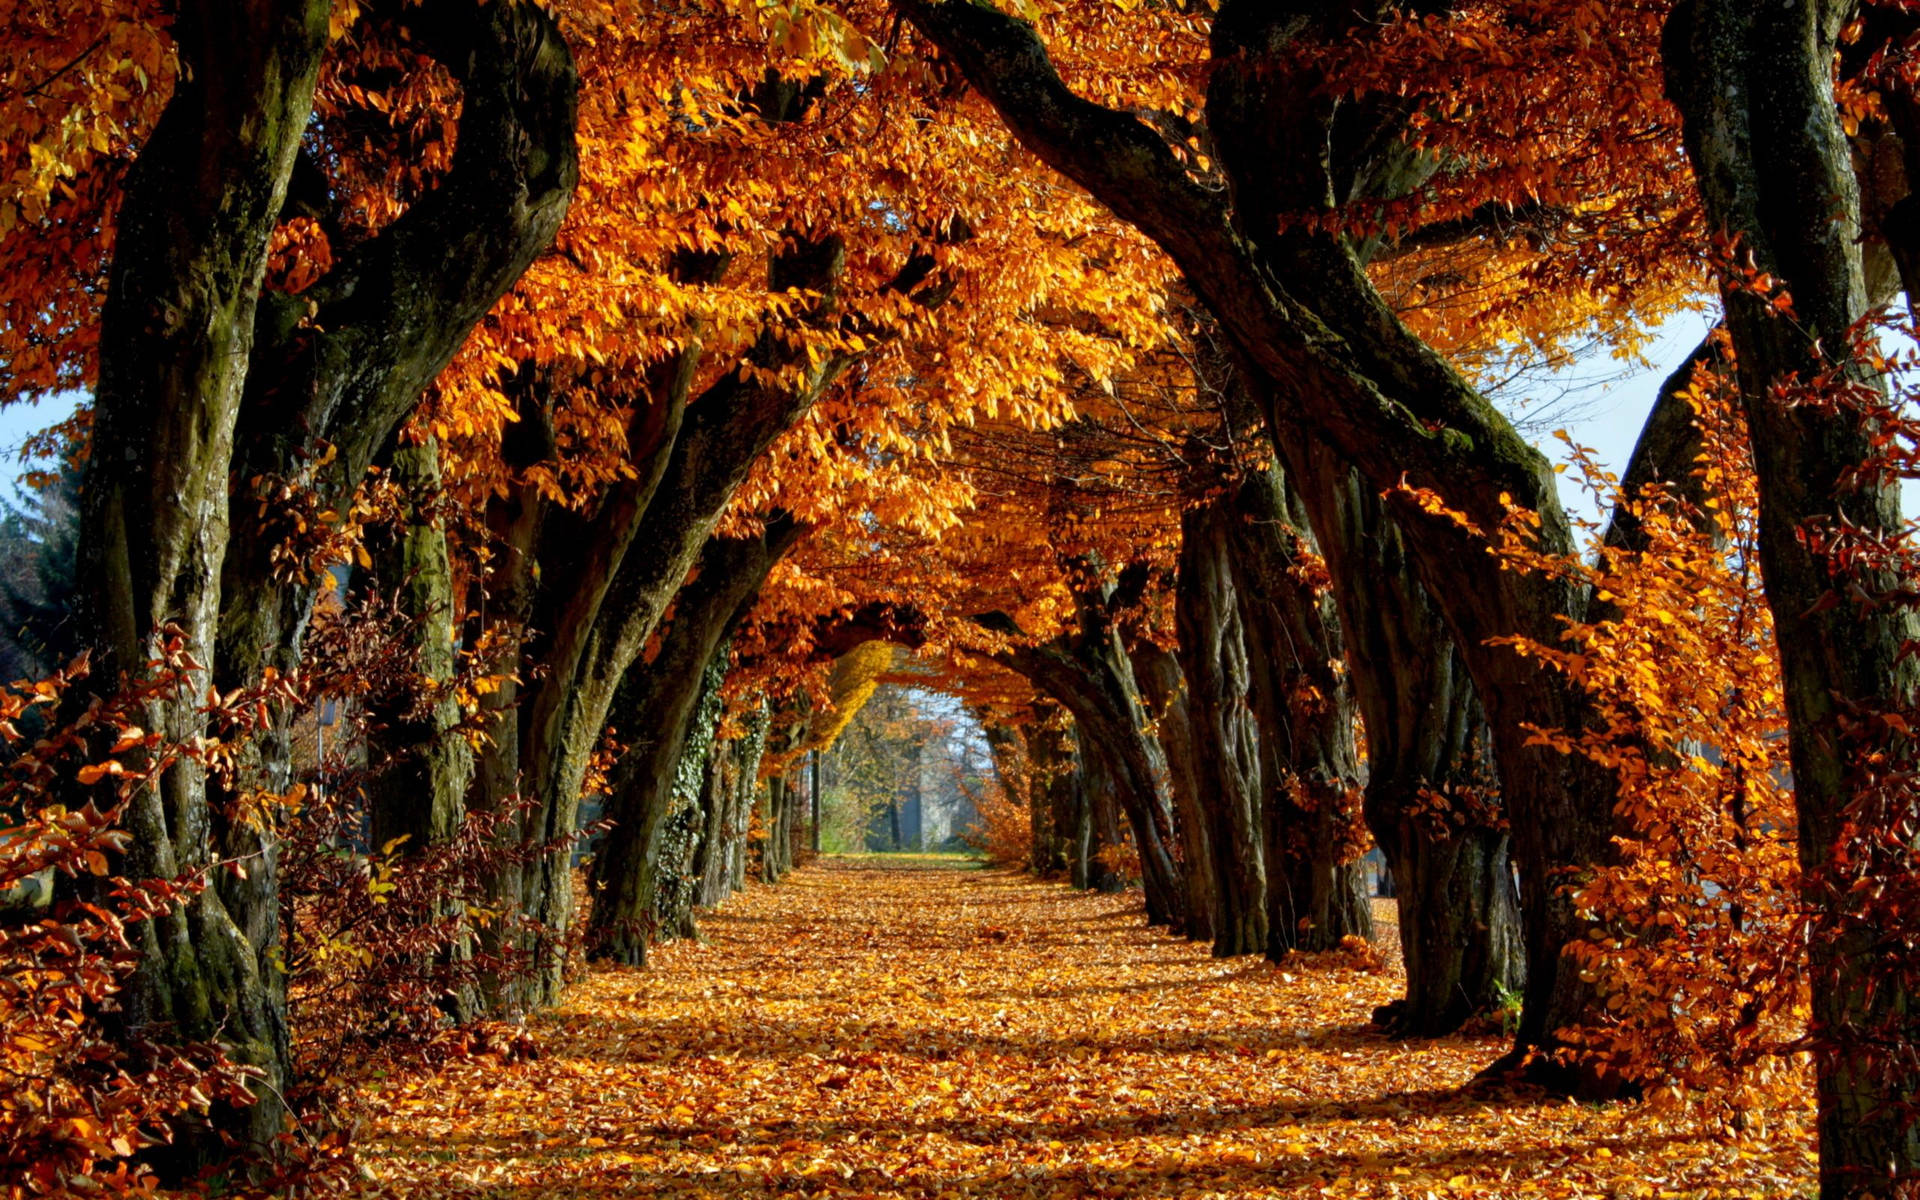 Take a stroll down this tranquil tree-lined pathway, lit up by the beauty of fall Wallpaper